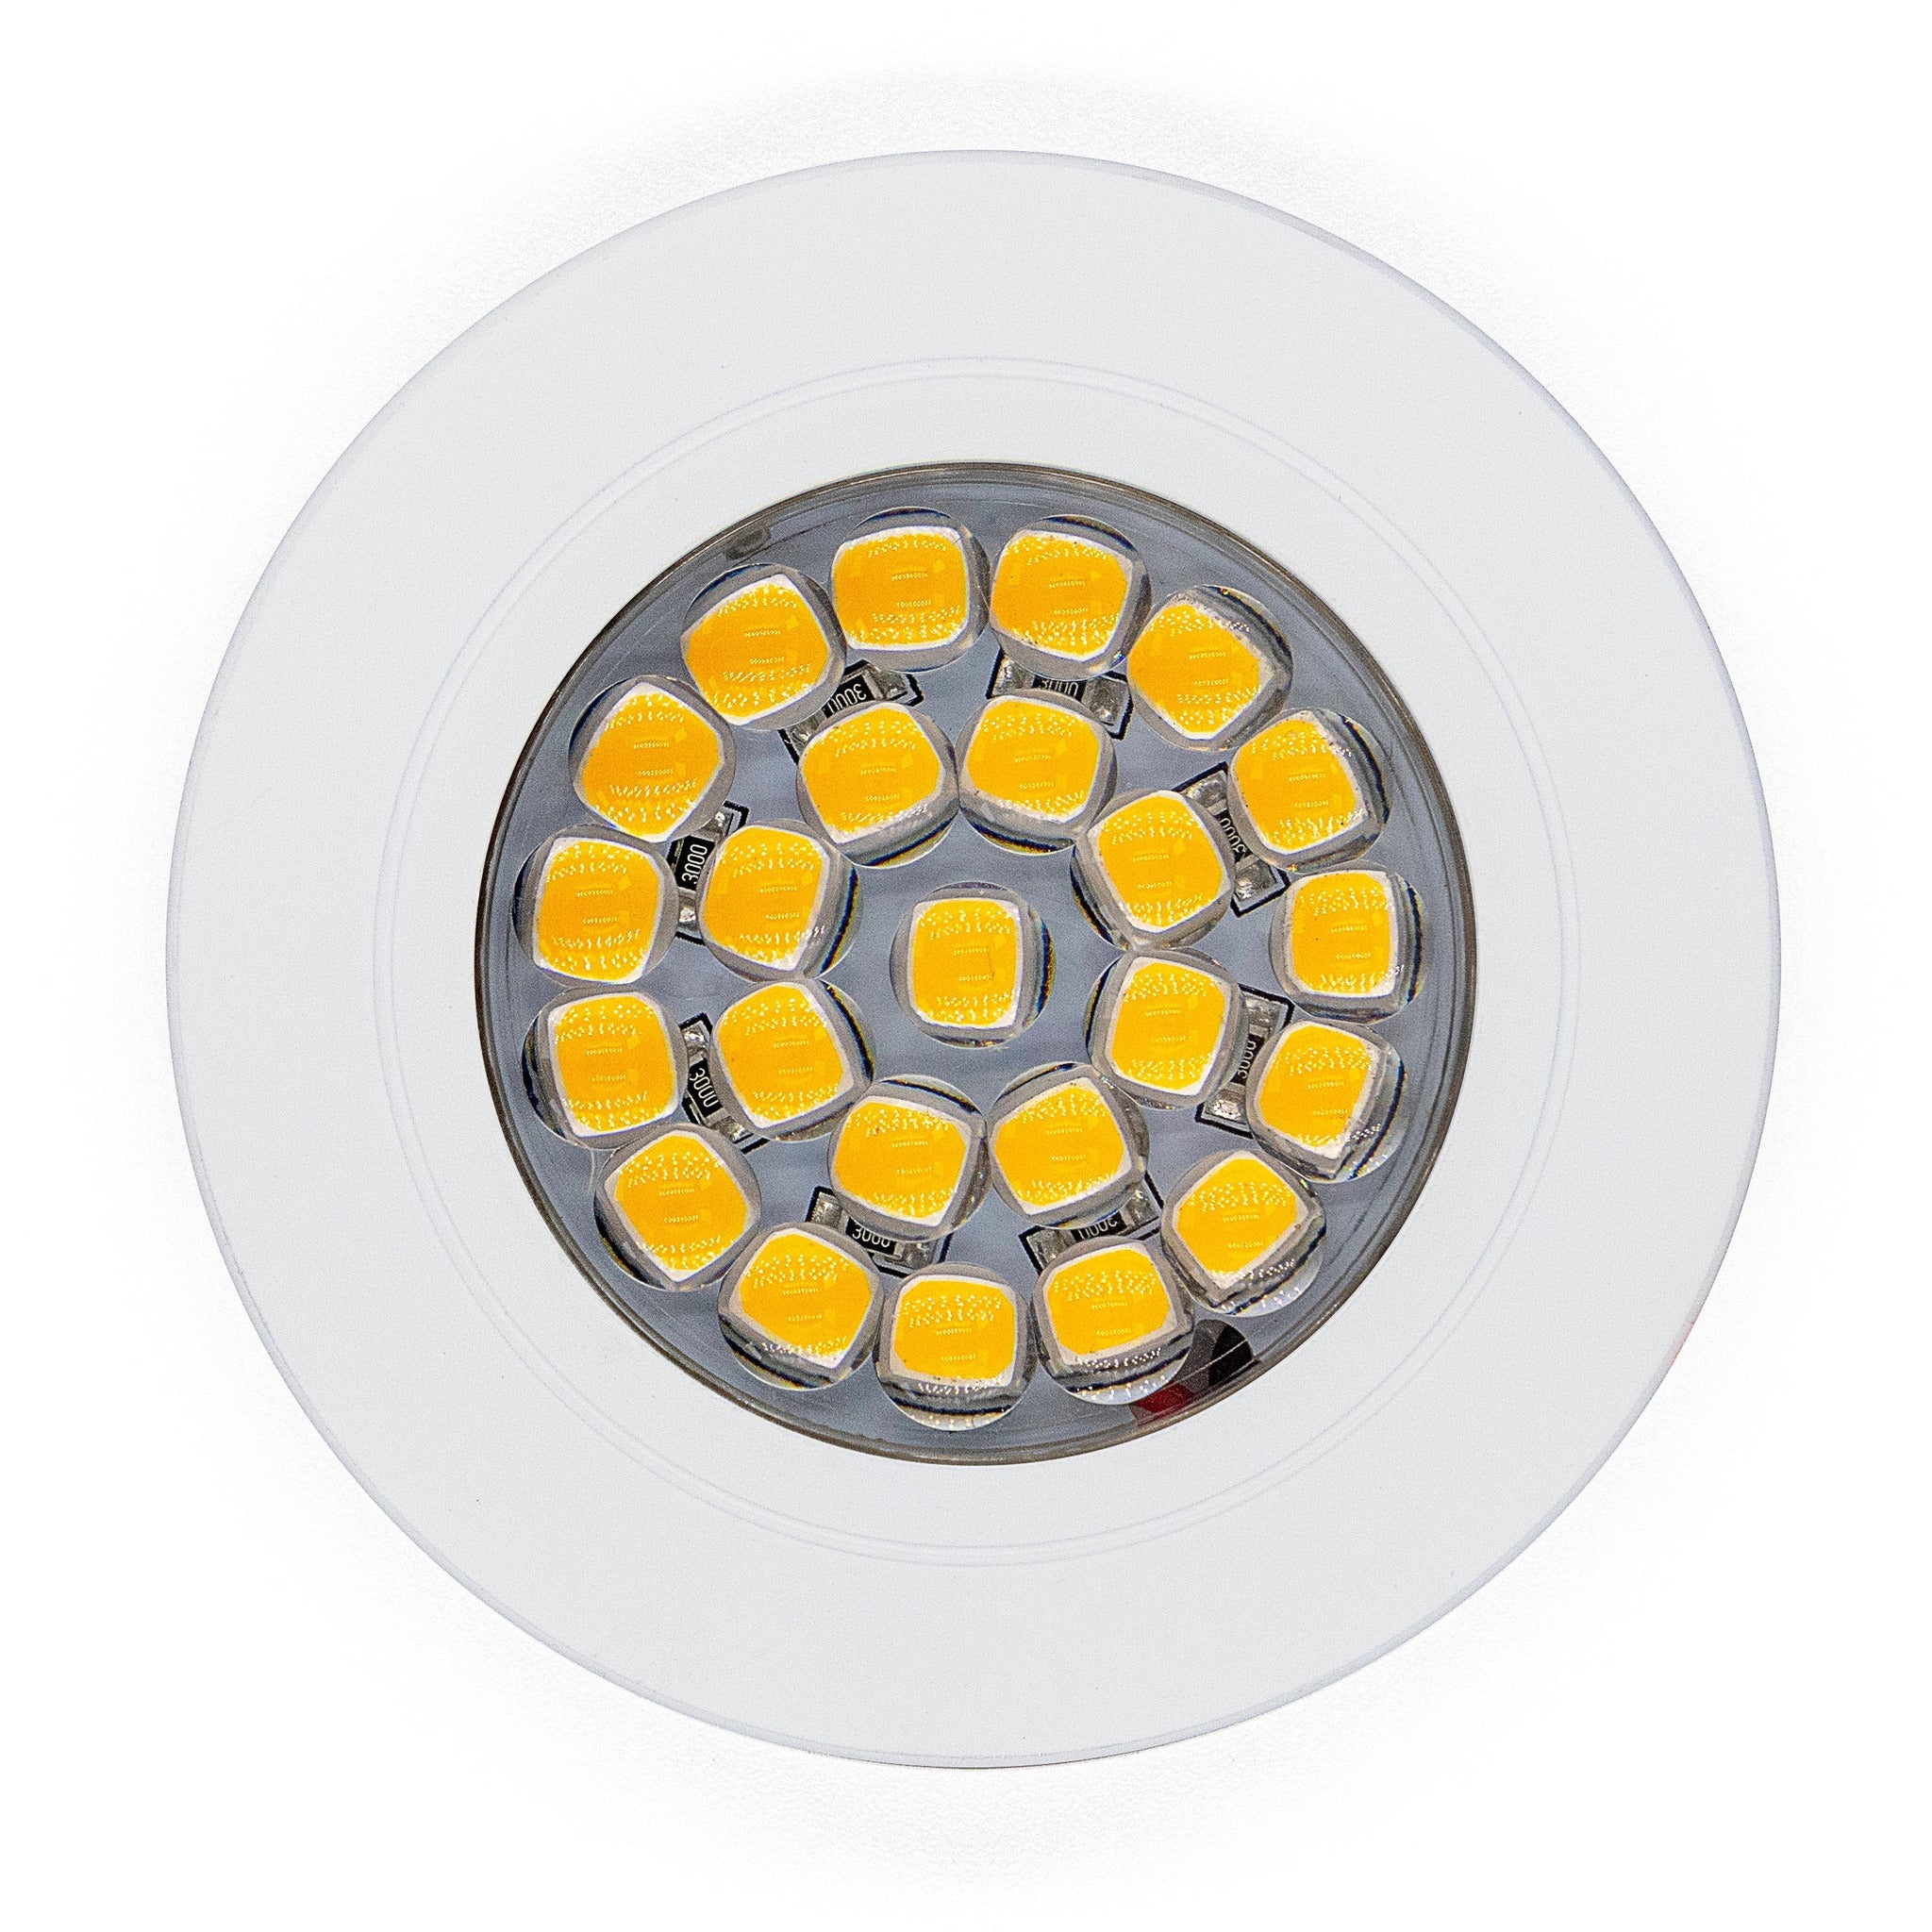 White 2W 24 LED Recessed Light - Dimmable, Touch On/Off (Warm White) Kiravans 